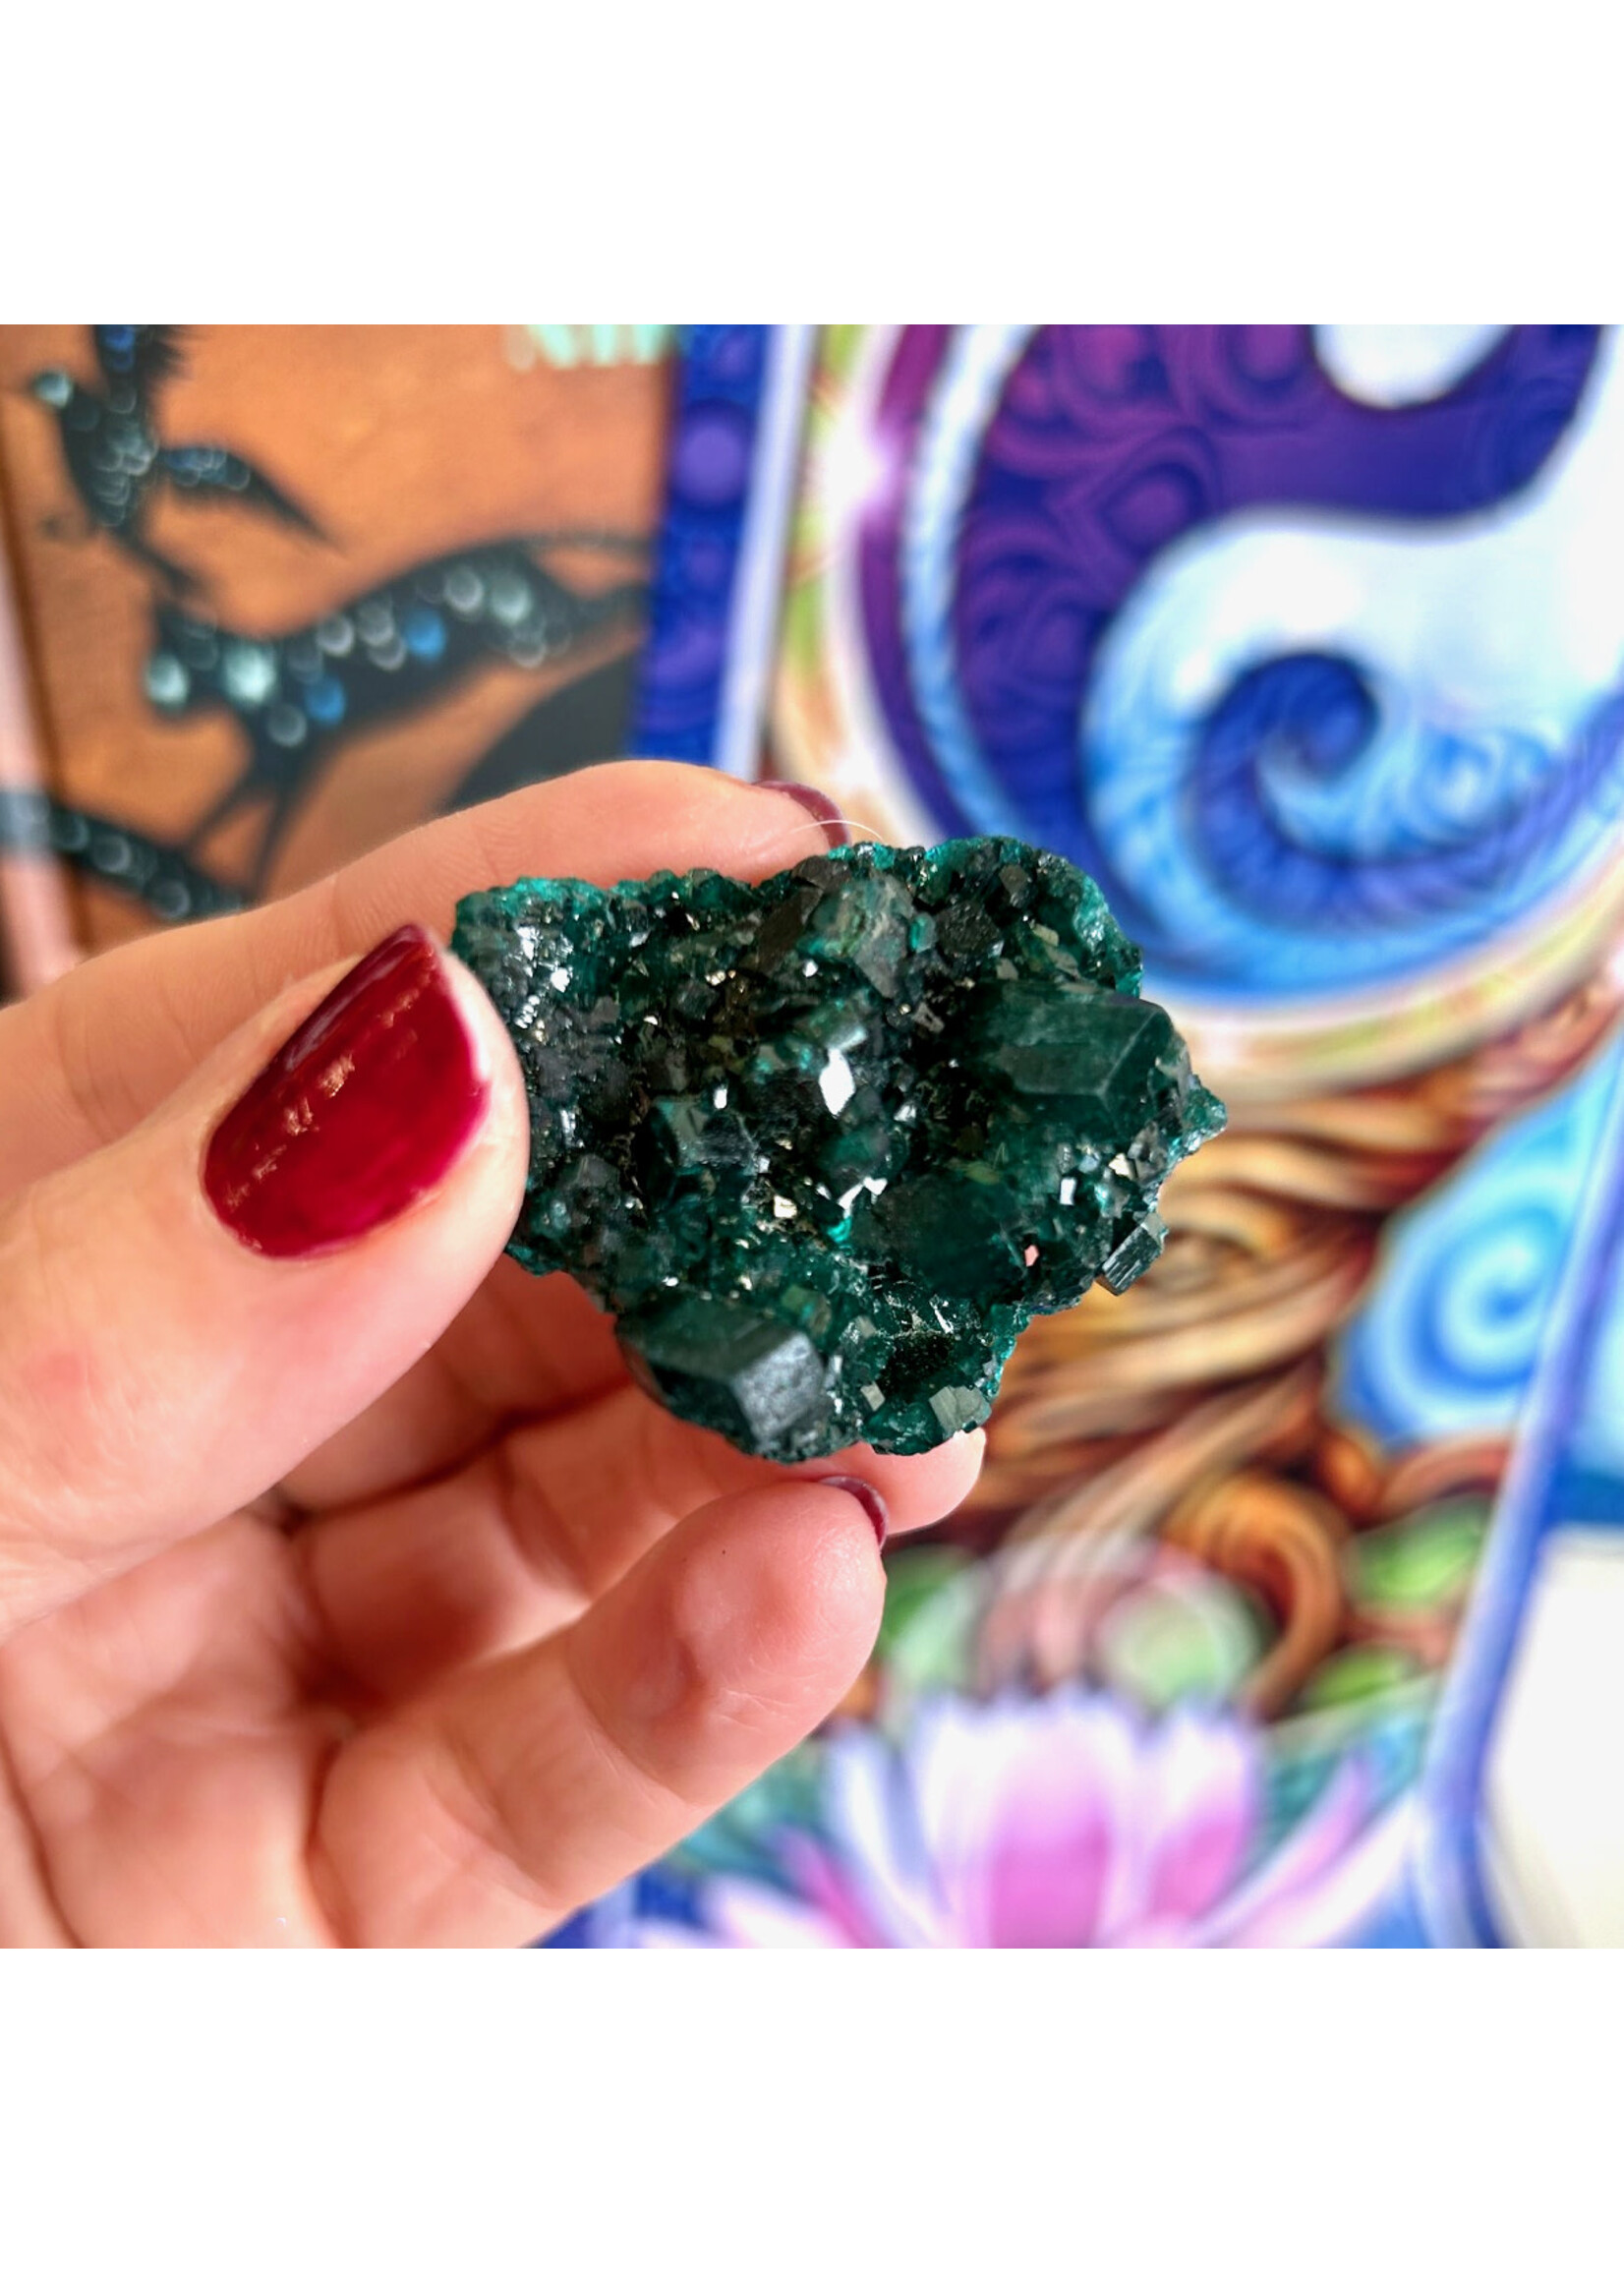 Dioptase for compassion and clearing